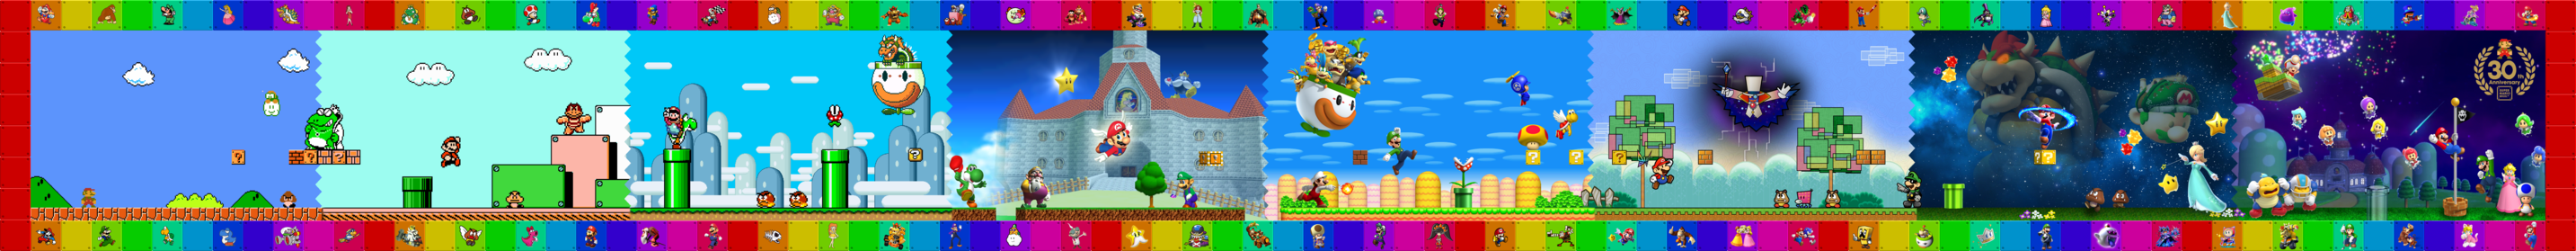 Super Mario Bros 30th Anniversary Tribute By Fawfulthegreat64 On